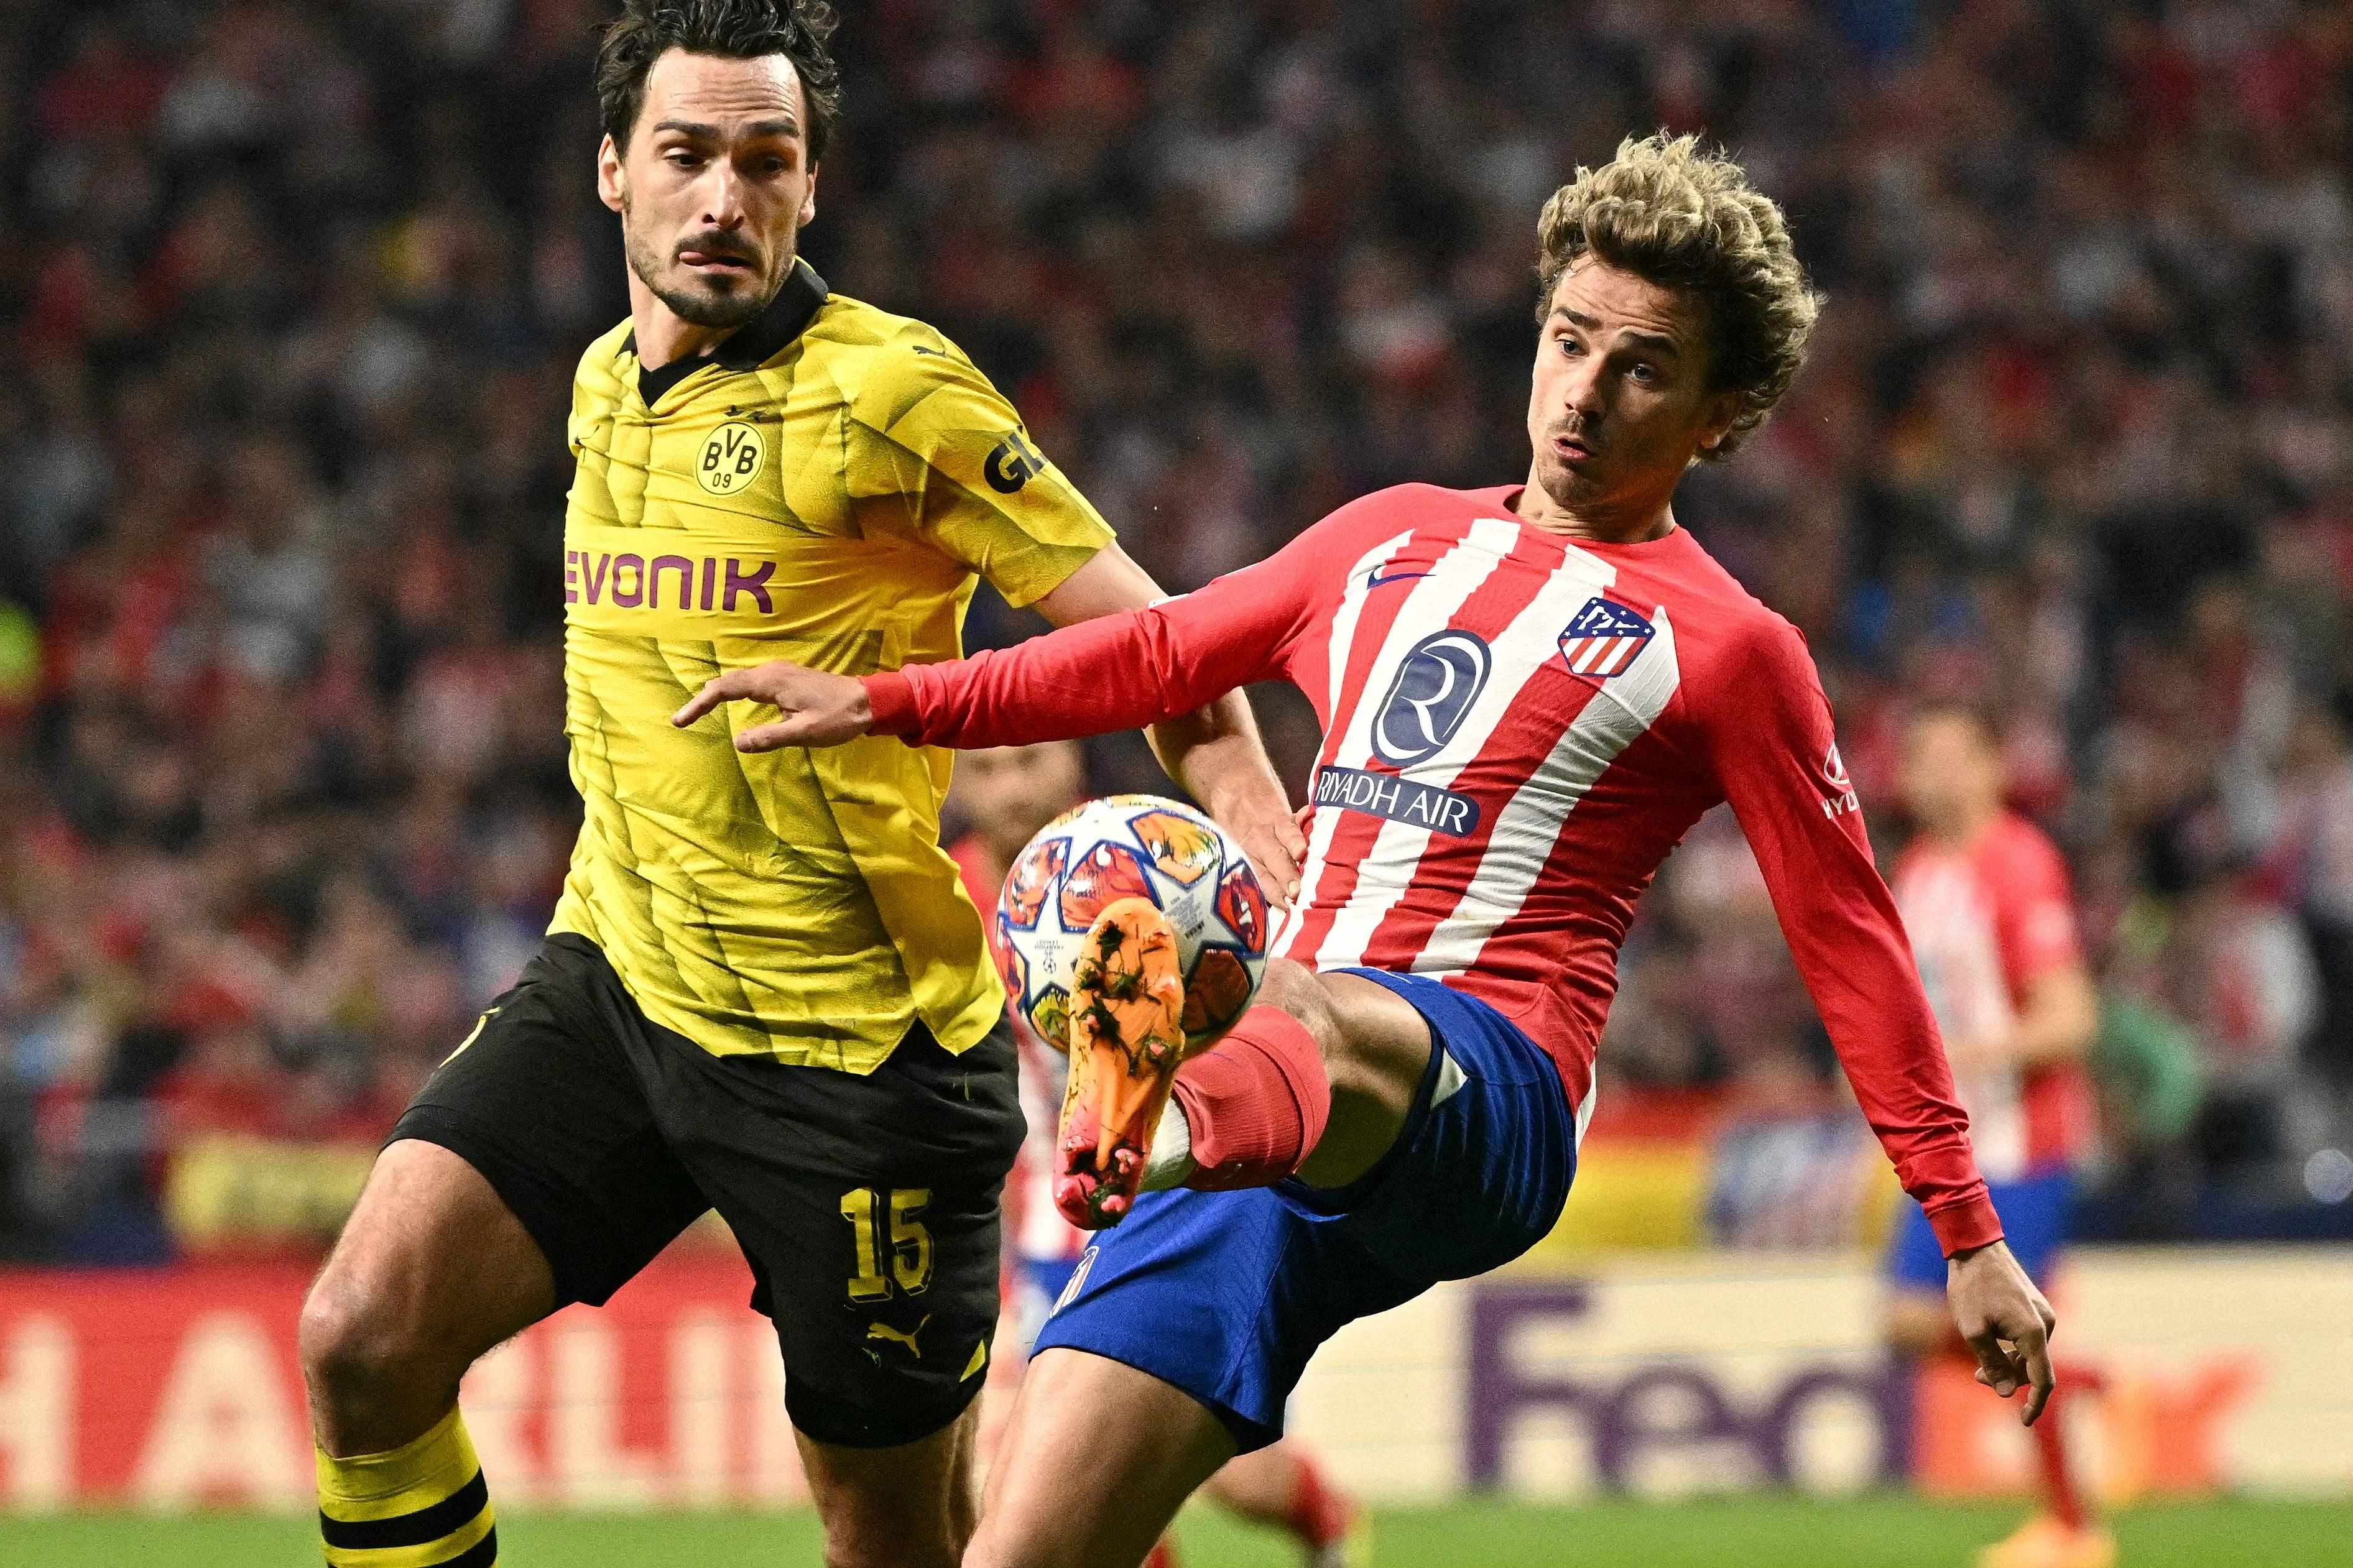 Atletico Madrid will have to suffer at Borussia Dortmund: Antoine Griezmann